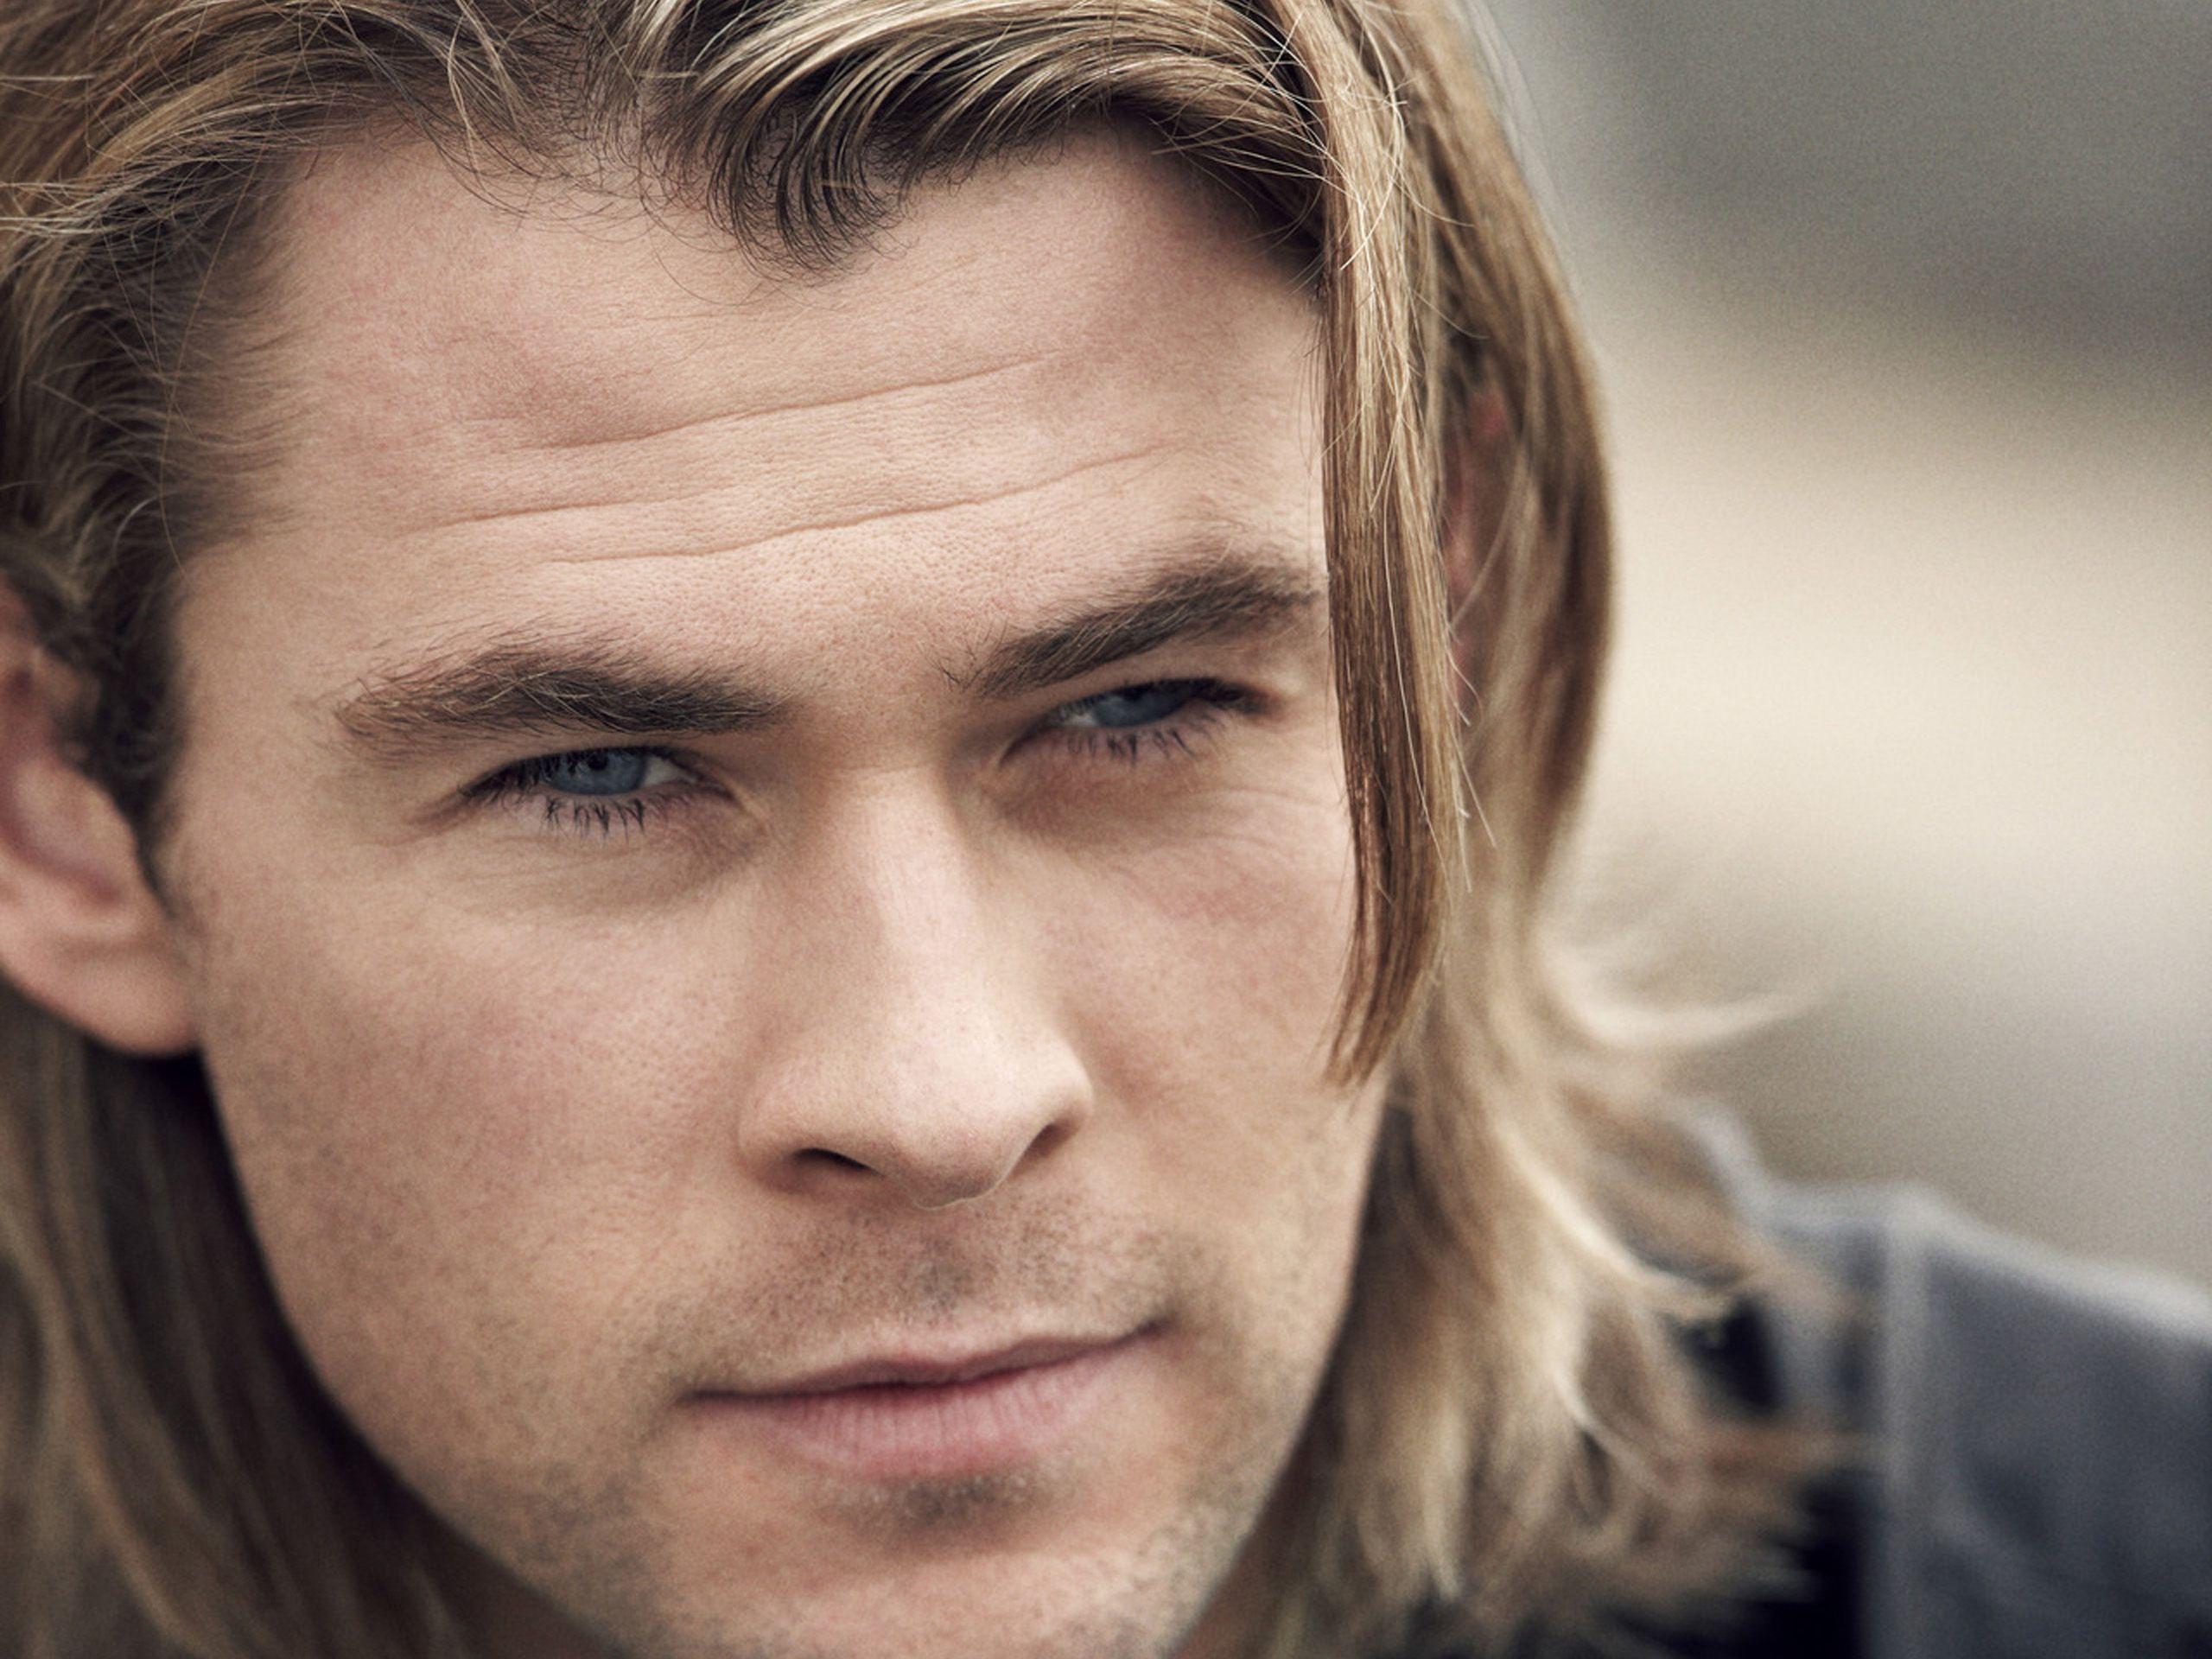 Chris Hemsworth Wallpaper High Resolution and Quality Download